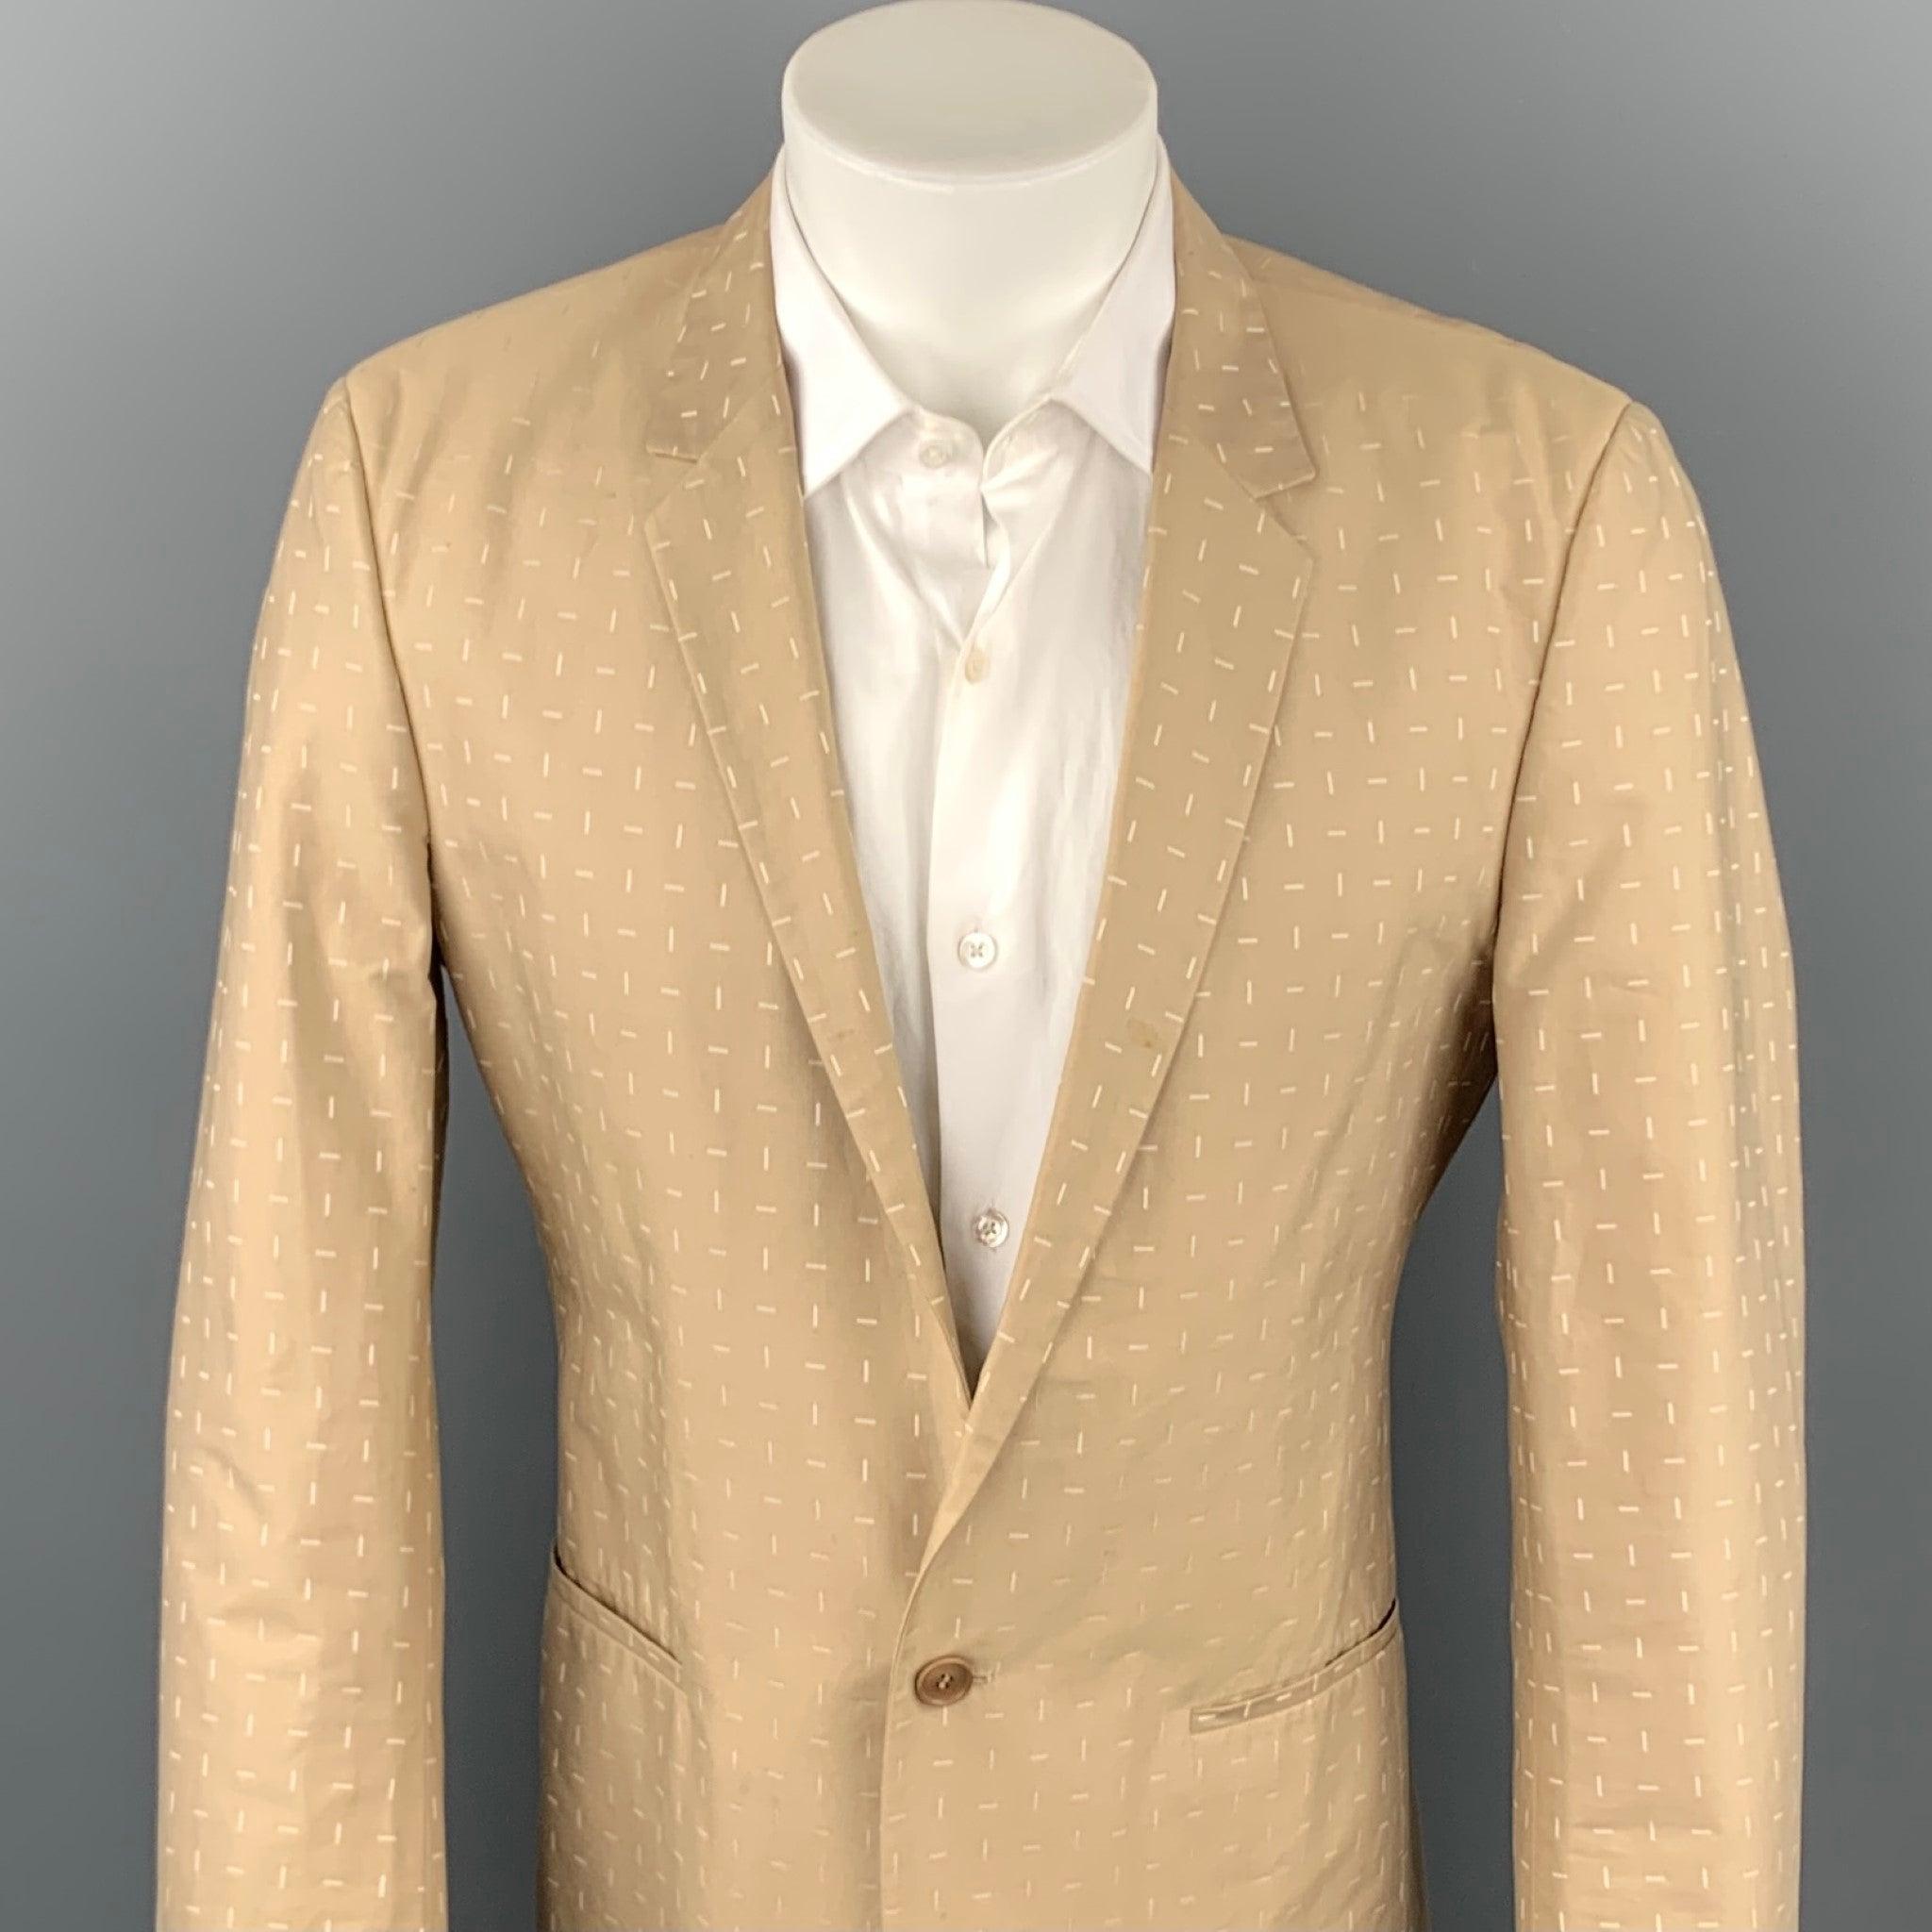 CALVIN KLEIN COLLECTION sport coat comes in a khaki print cotton with a full liner featuring a notch lapel, slit pockets, and a single button closure. Minor wear throughout.Good
Pre-Owned Condition. 

Marked:   48/38 

Measurements: 
 
Shoulder: 18